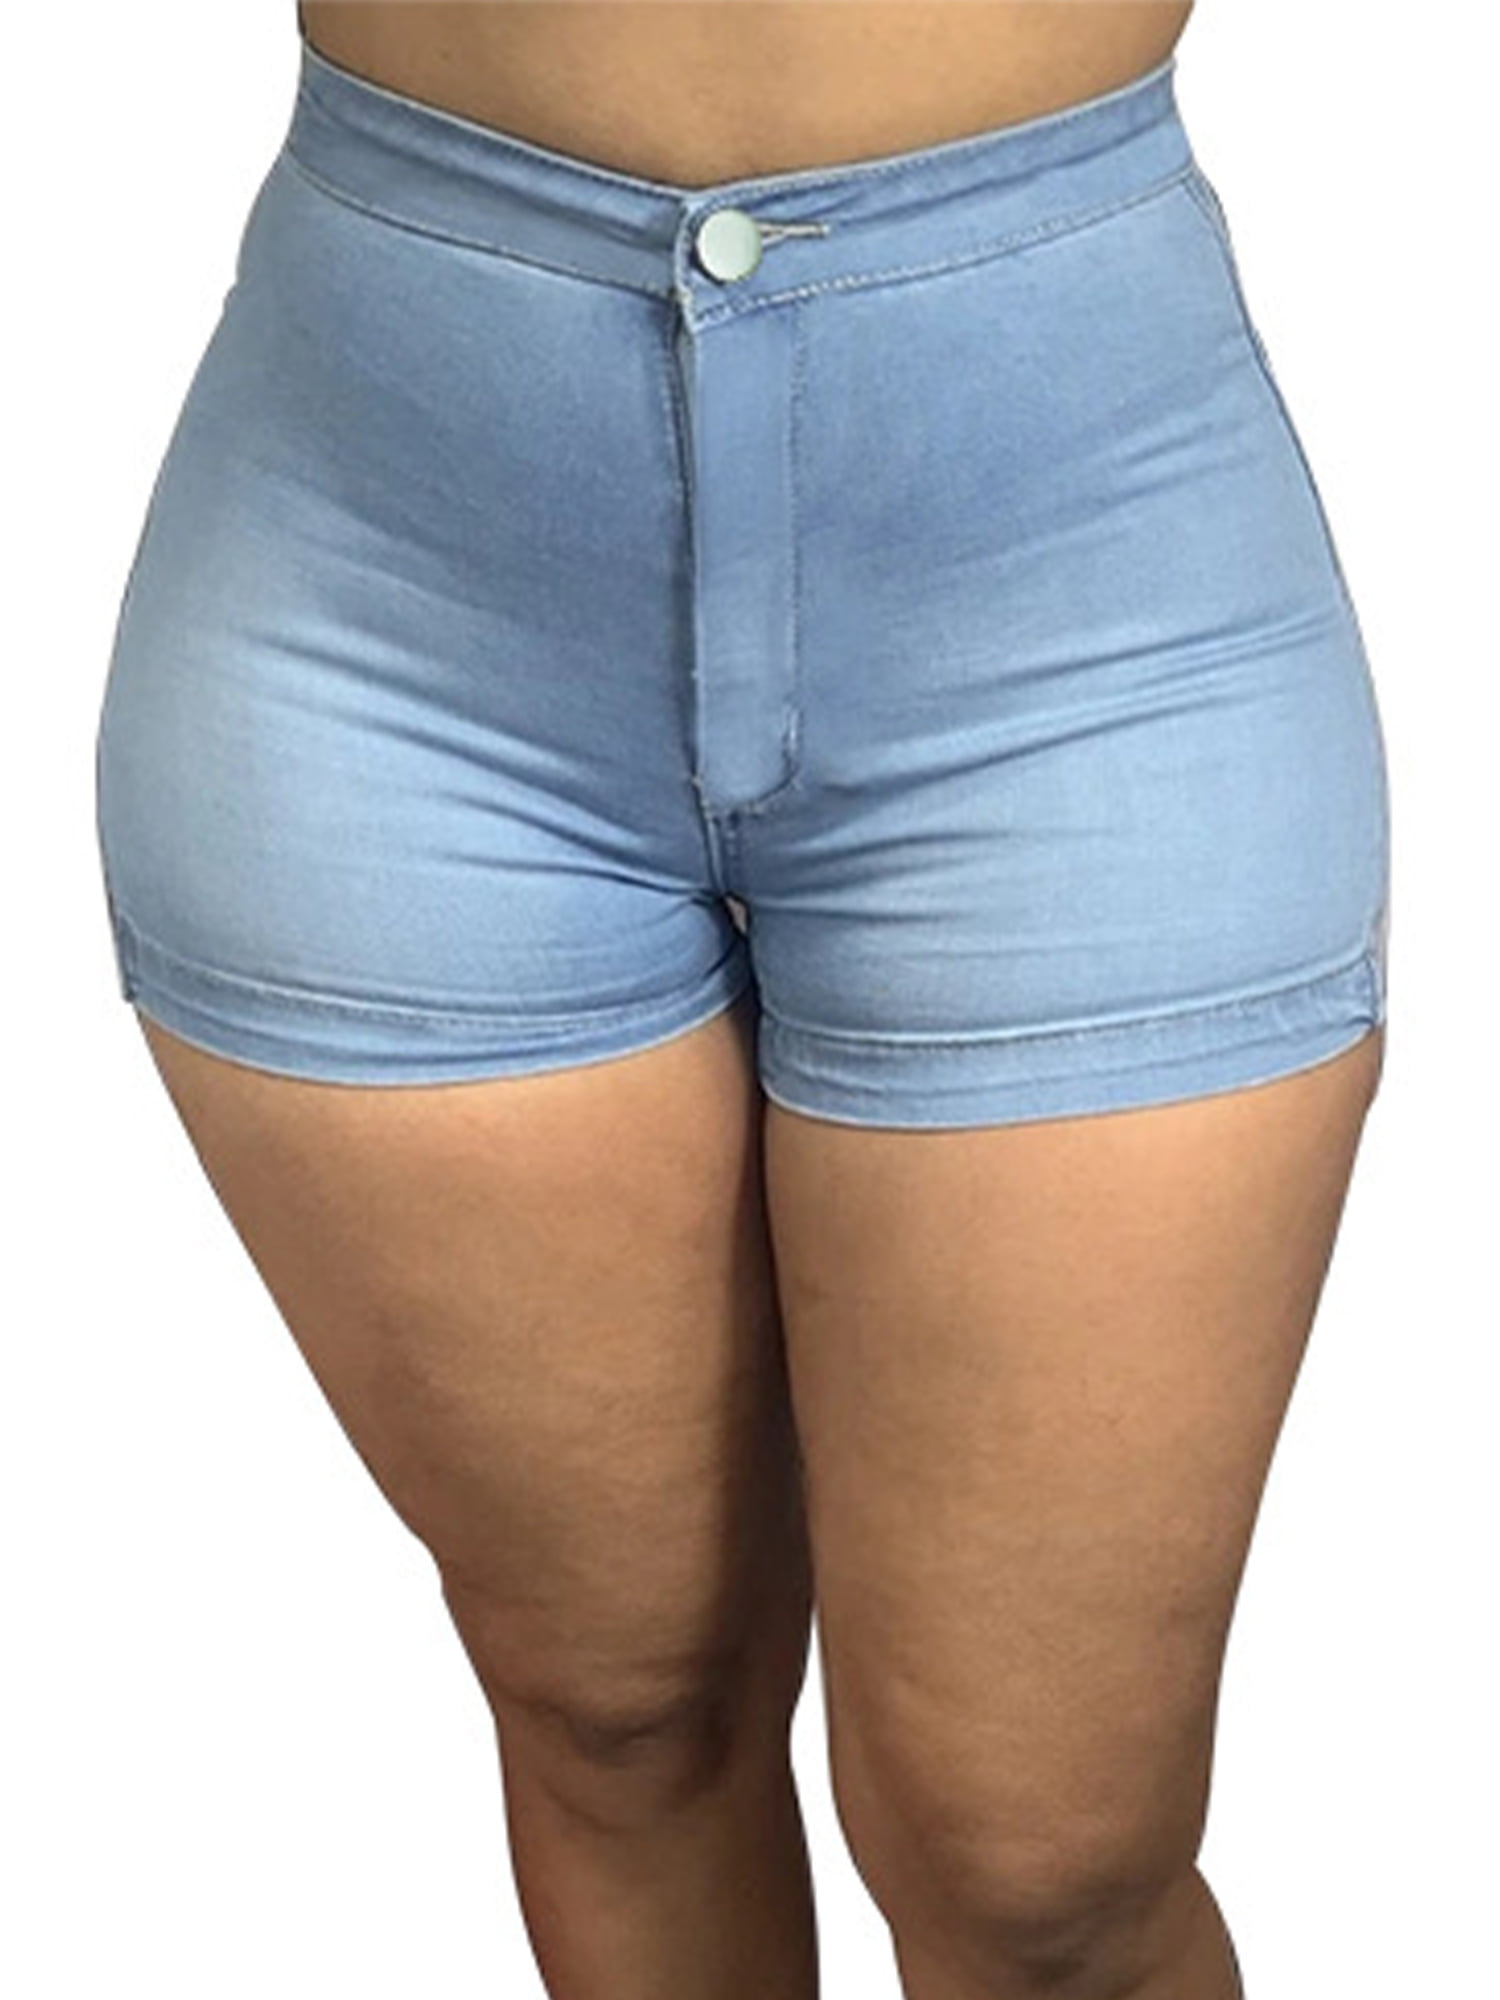 Frontwalk Ladies High Rise Waisted Stretch Shorts Bottomings Fashion Sexy  Denim Stretchy Beach Short Pants 